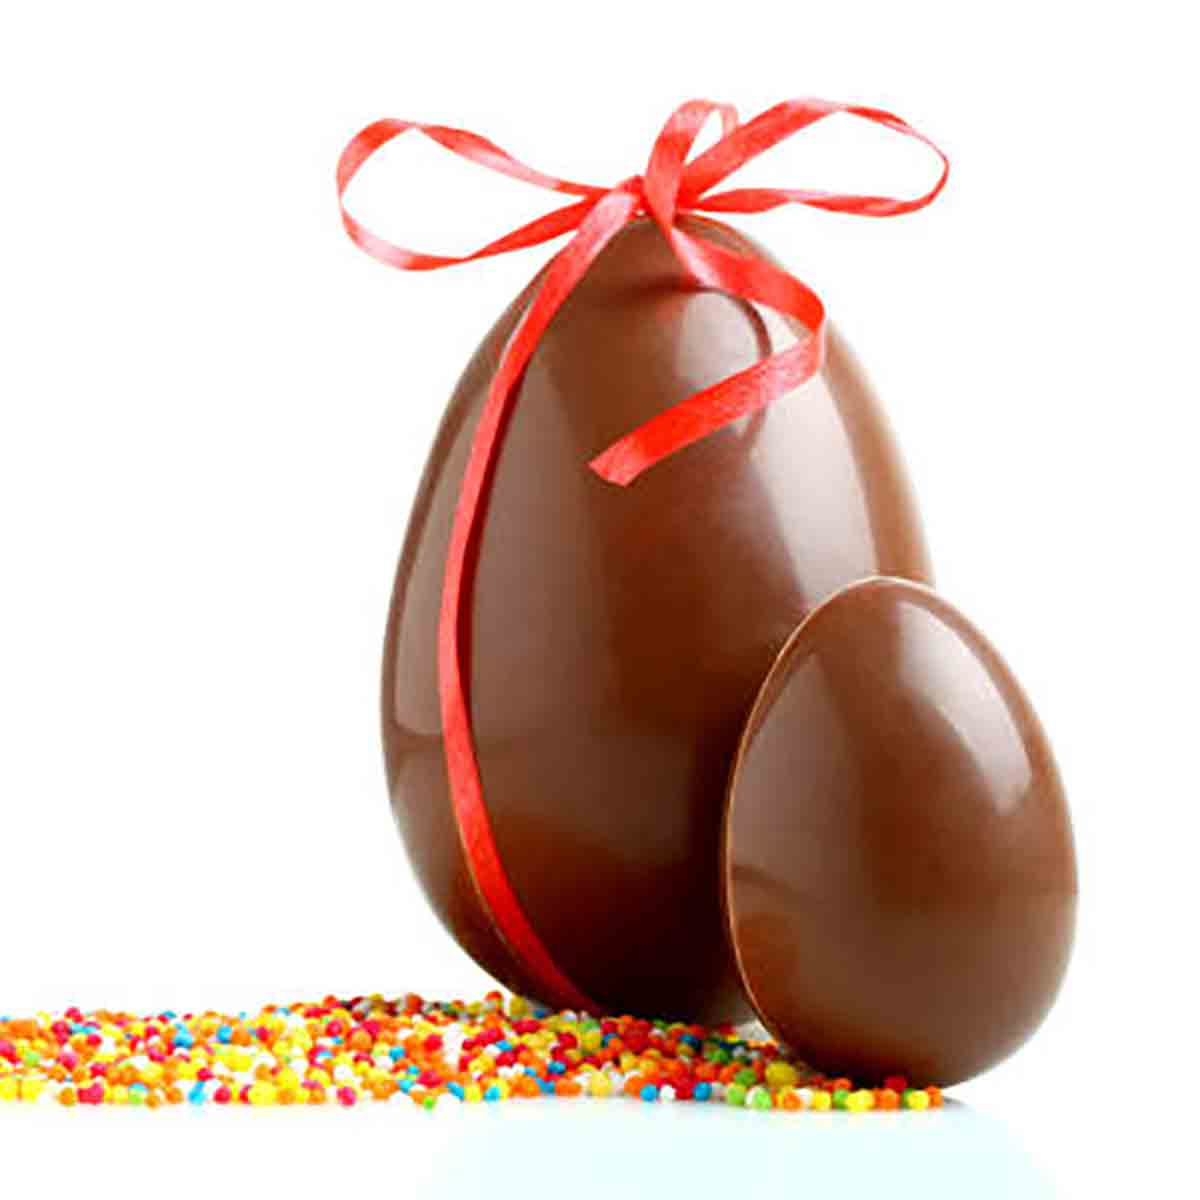 Two chocolate eggs, one small and one large.